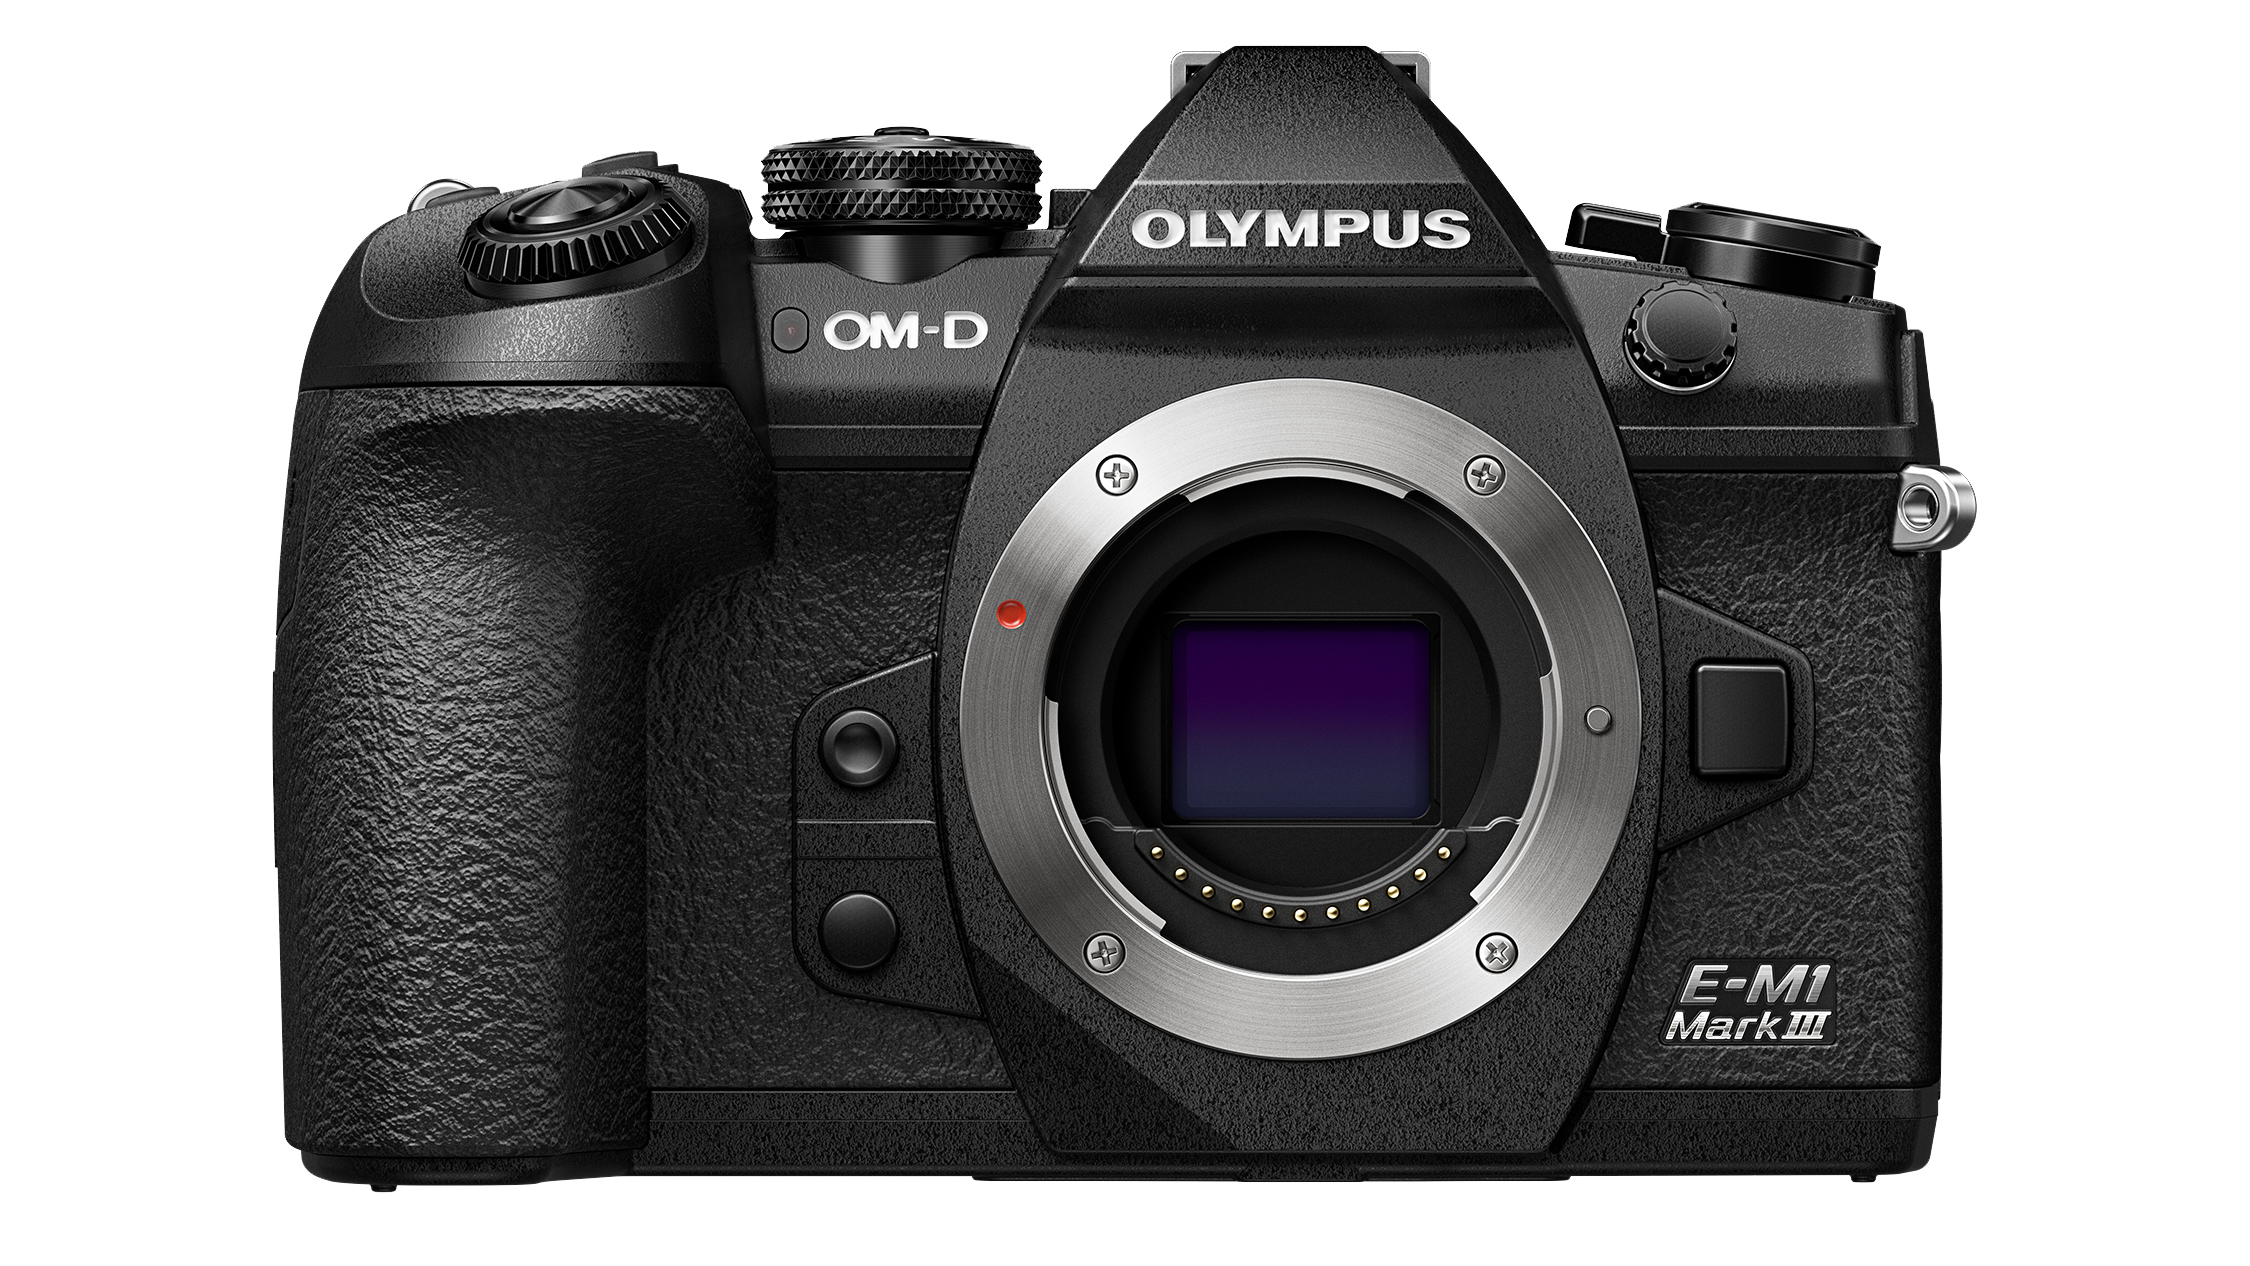 Best astrophotography cameras – Olympus OM-D E-M1 Mark III